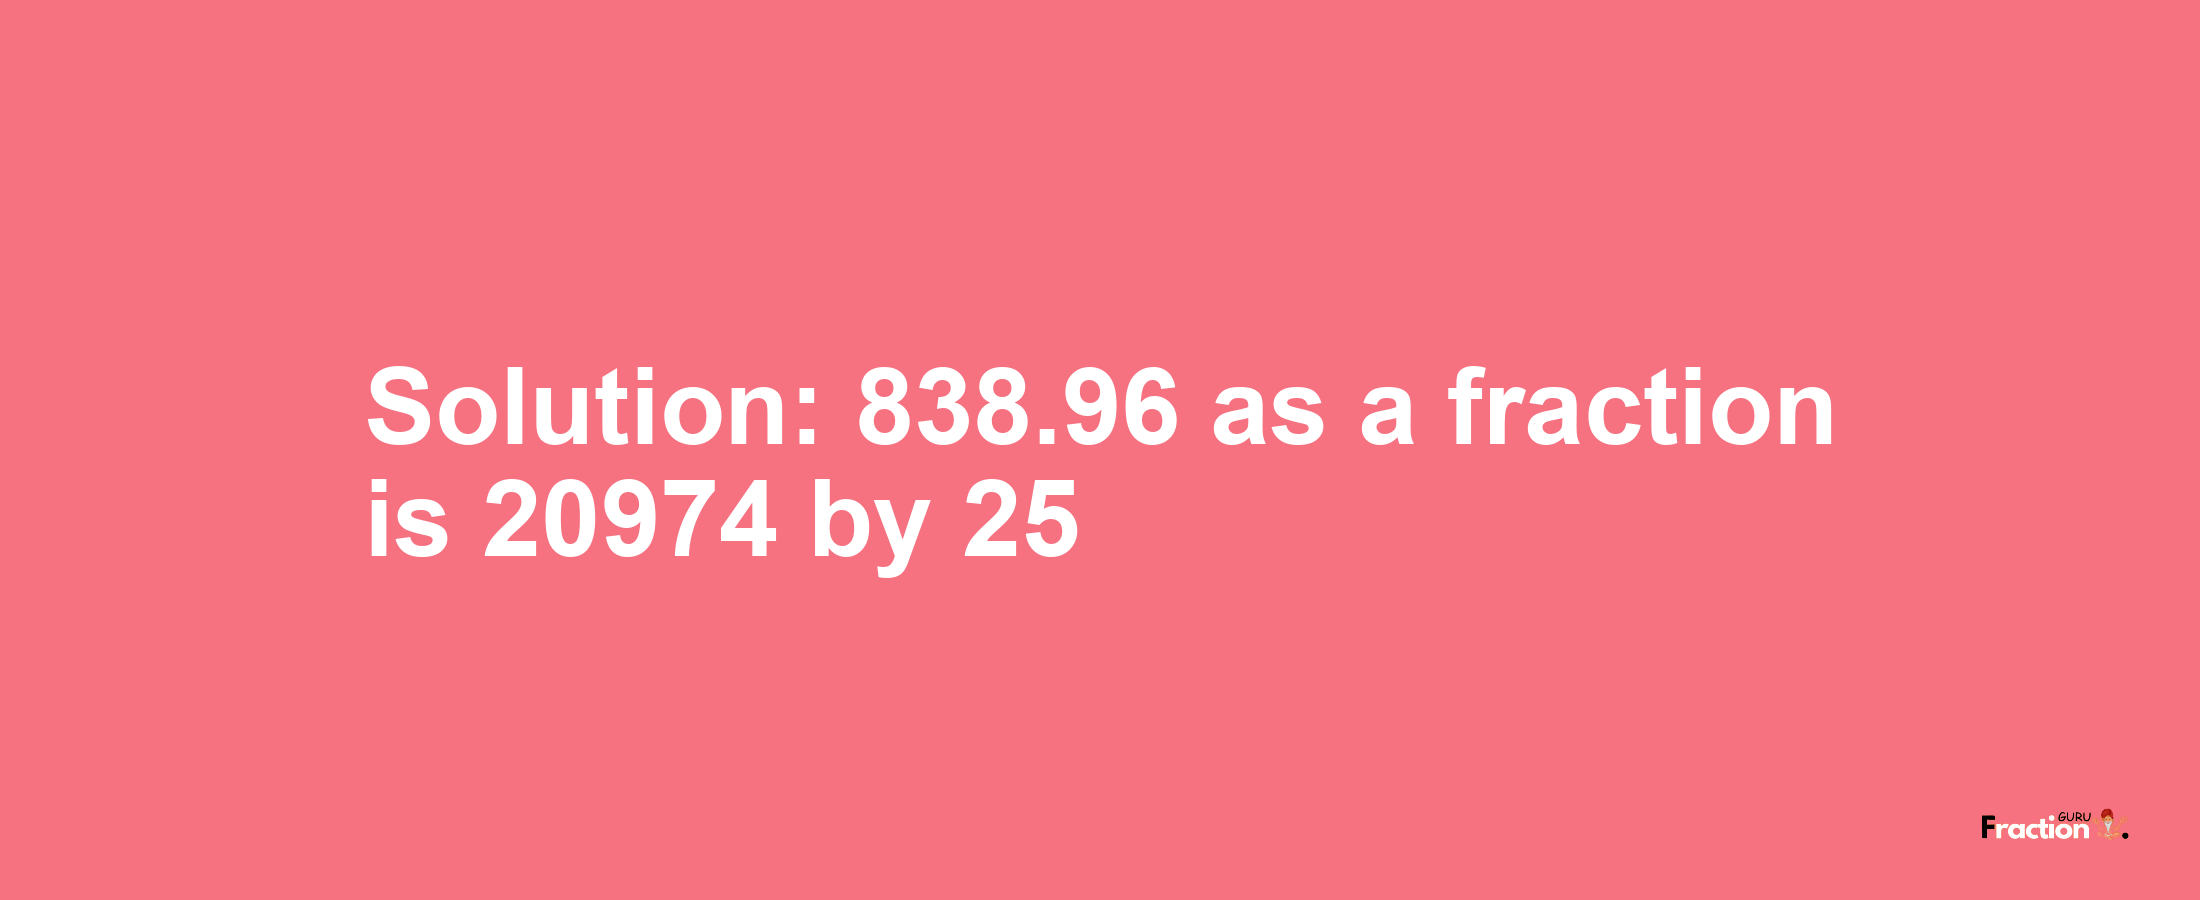 Solution:838.96 as a fraction is 20974/25